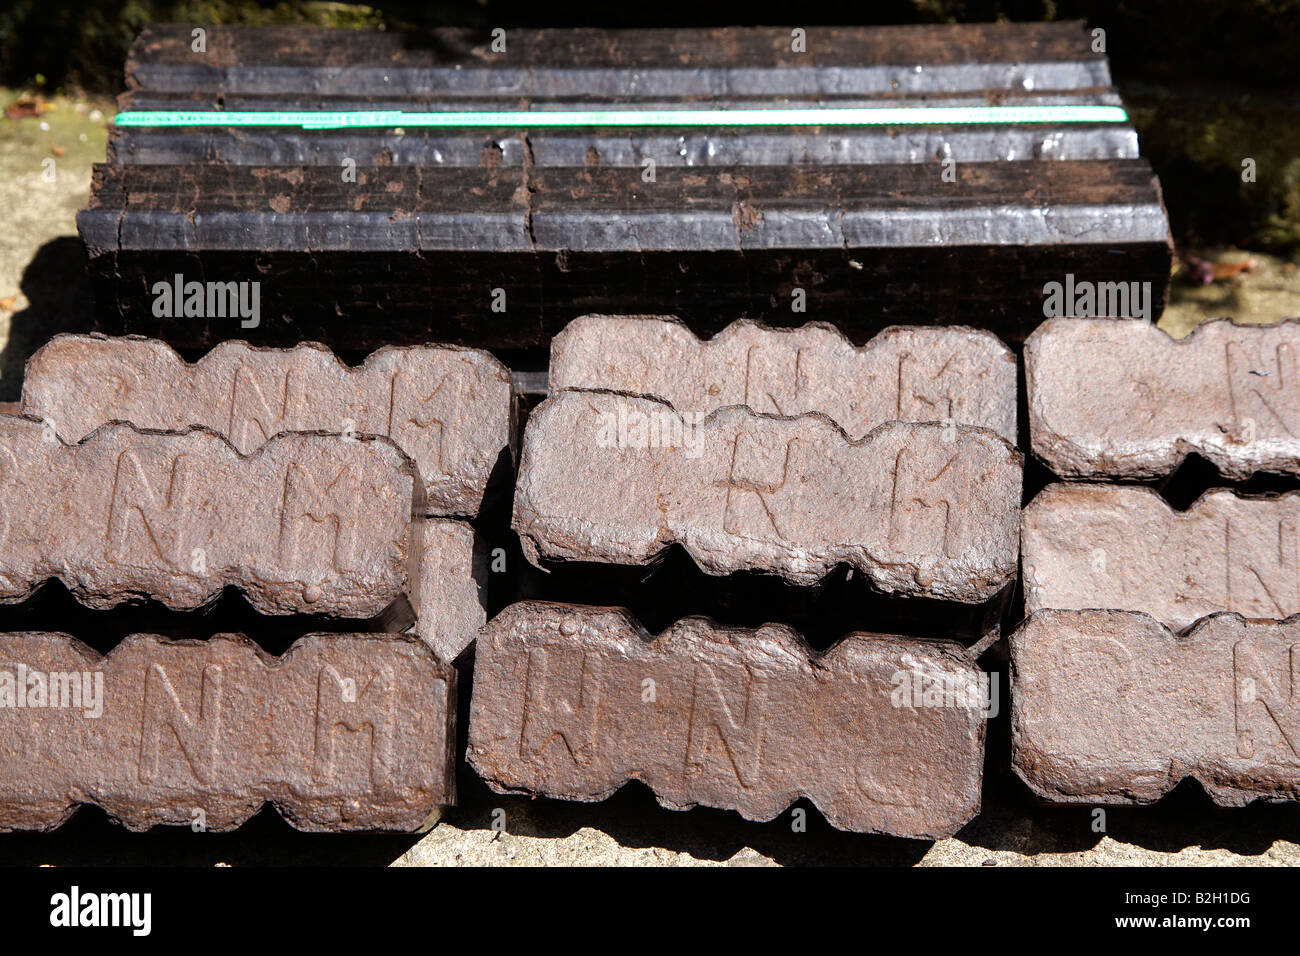 Peat Briquettes (bord na mona) Stacked and ready to be burnt Stock Photo